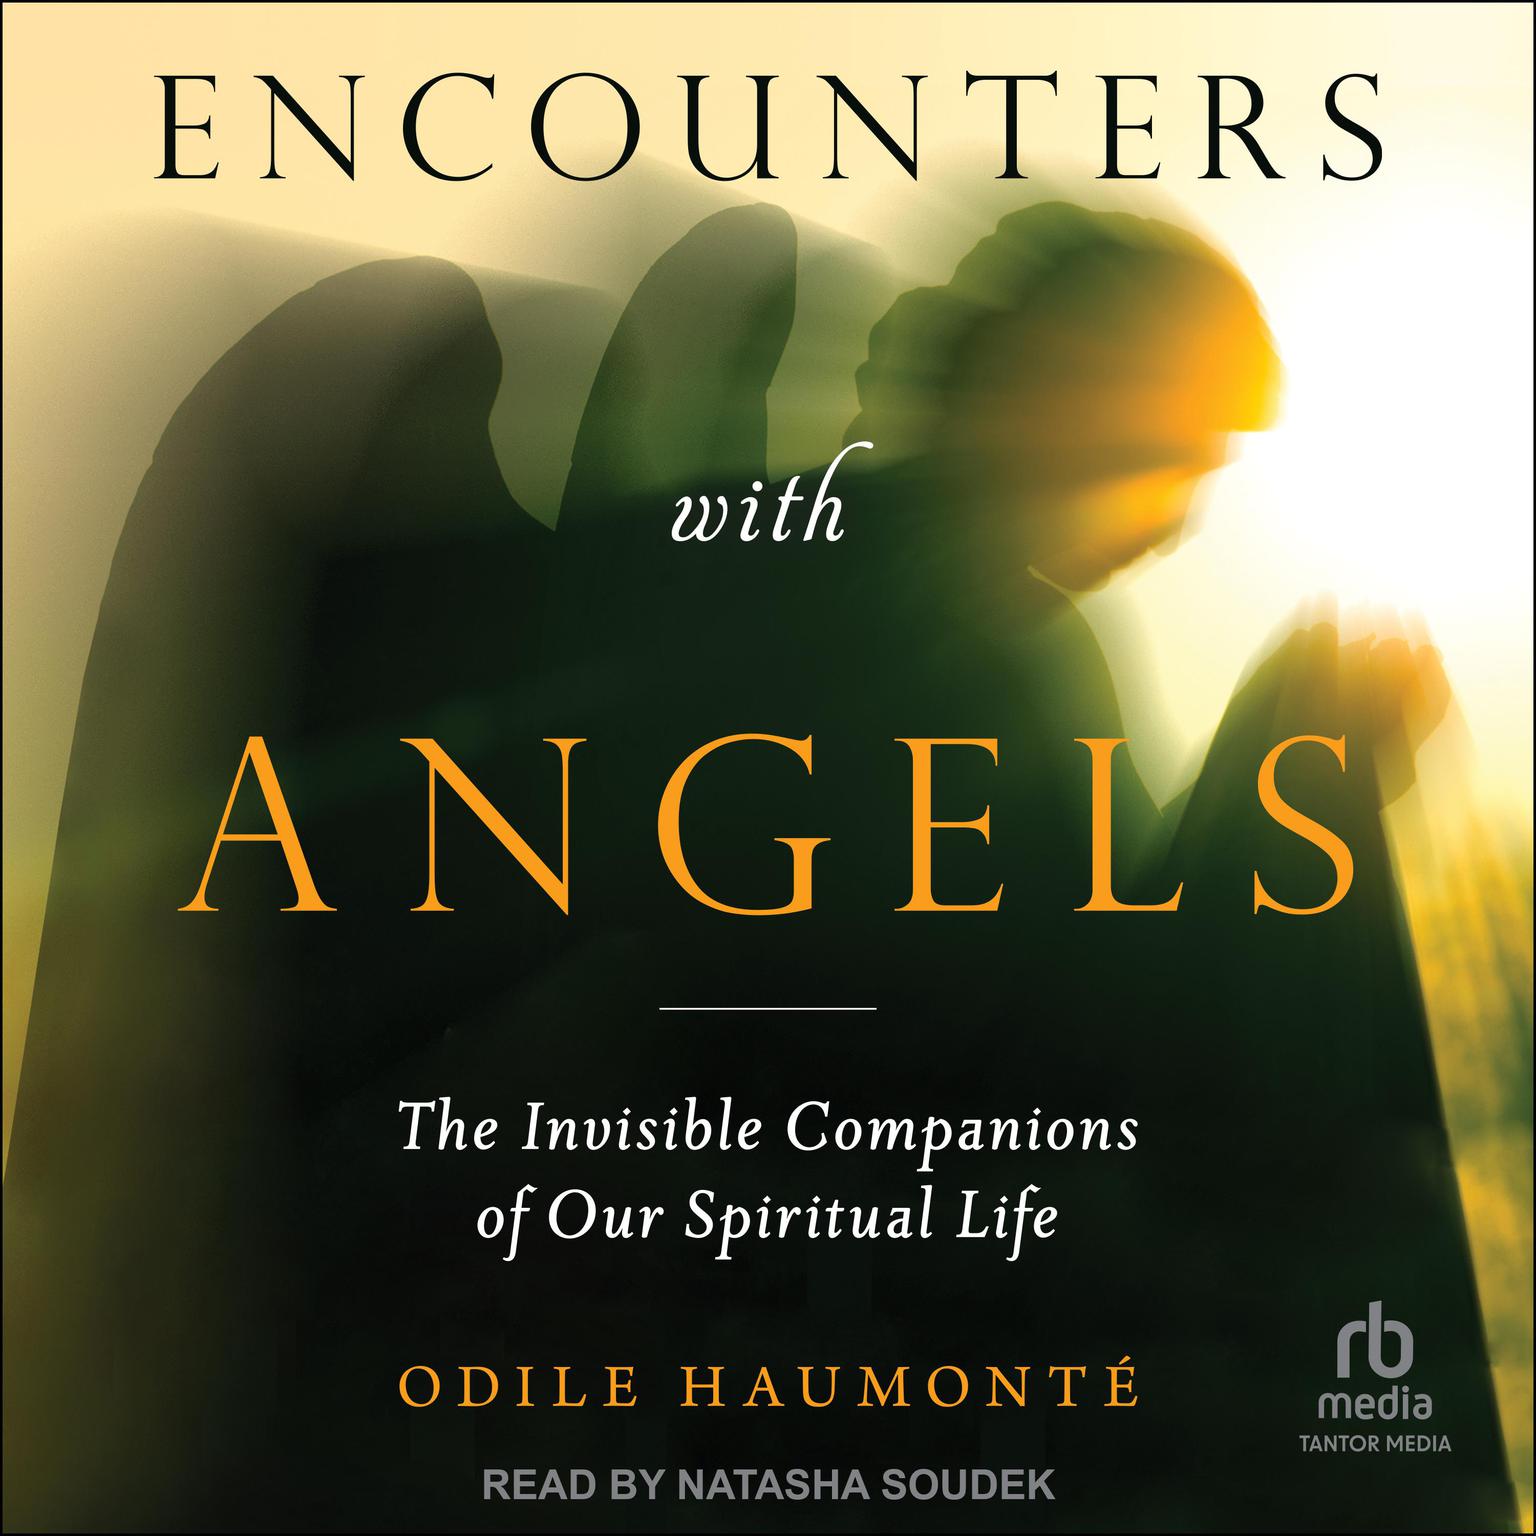 Encounters with Angels: The Invisible Companions of Our Spiritual Life Audiobook, by Odile Haumonte